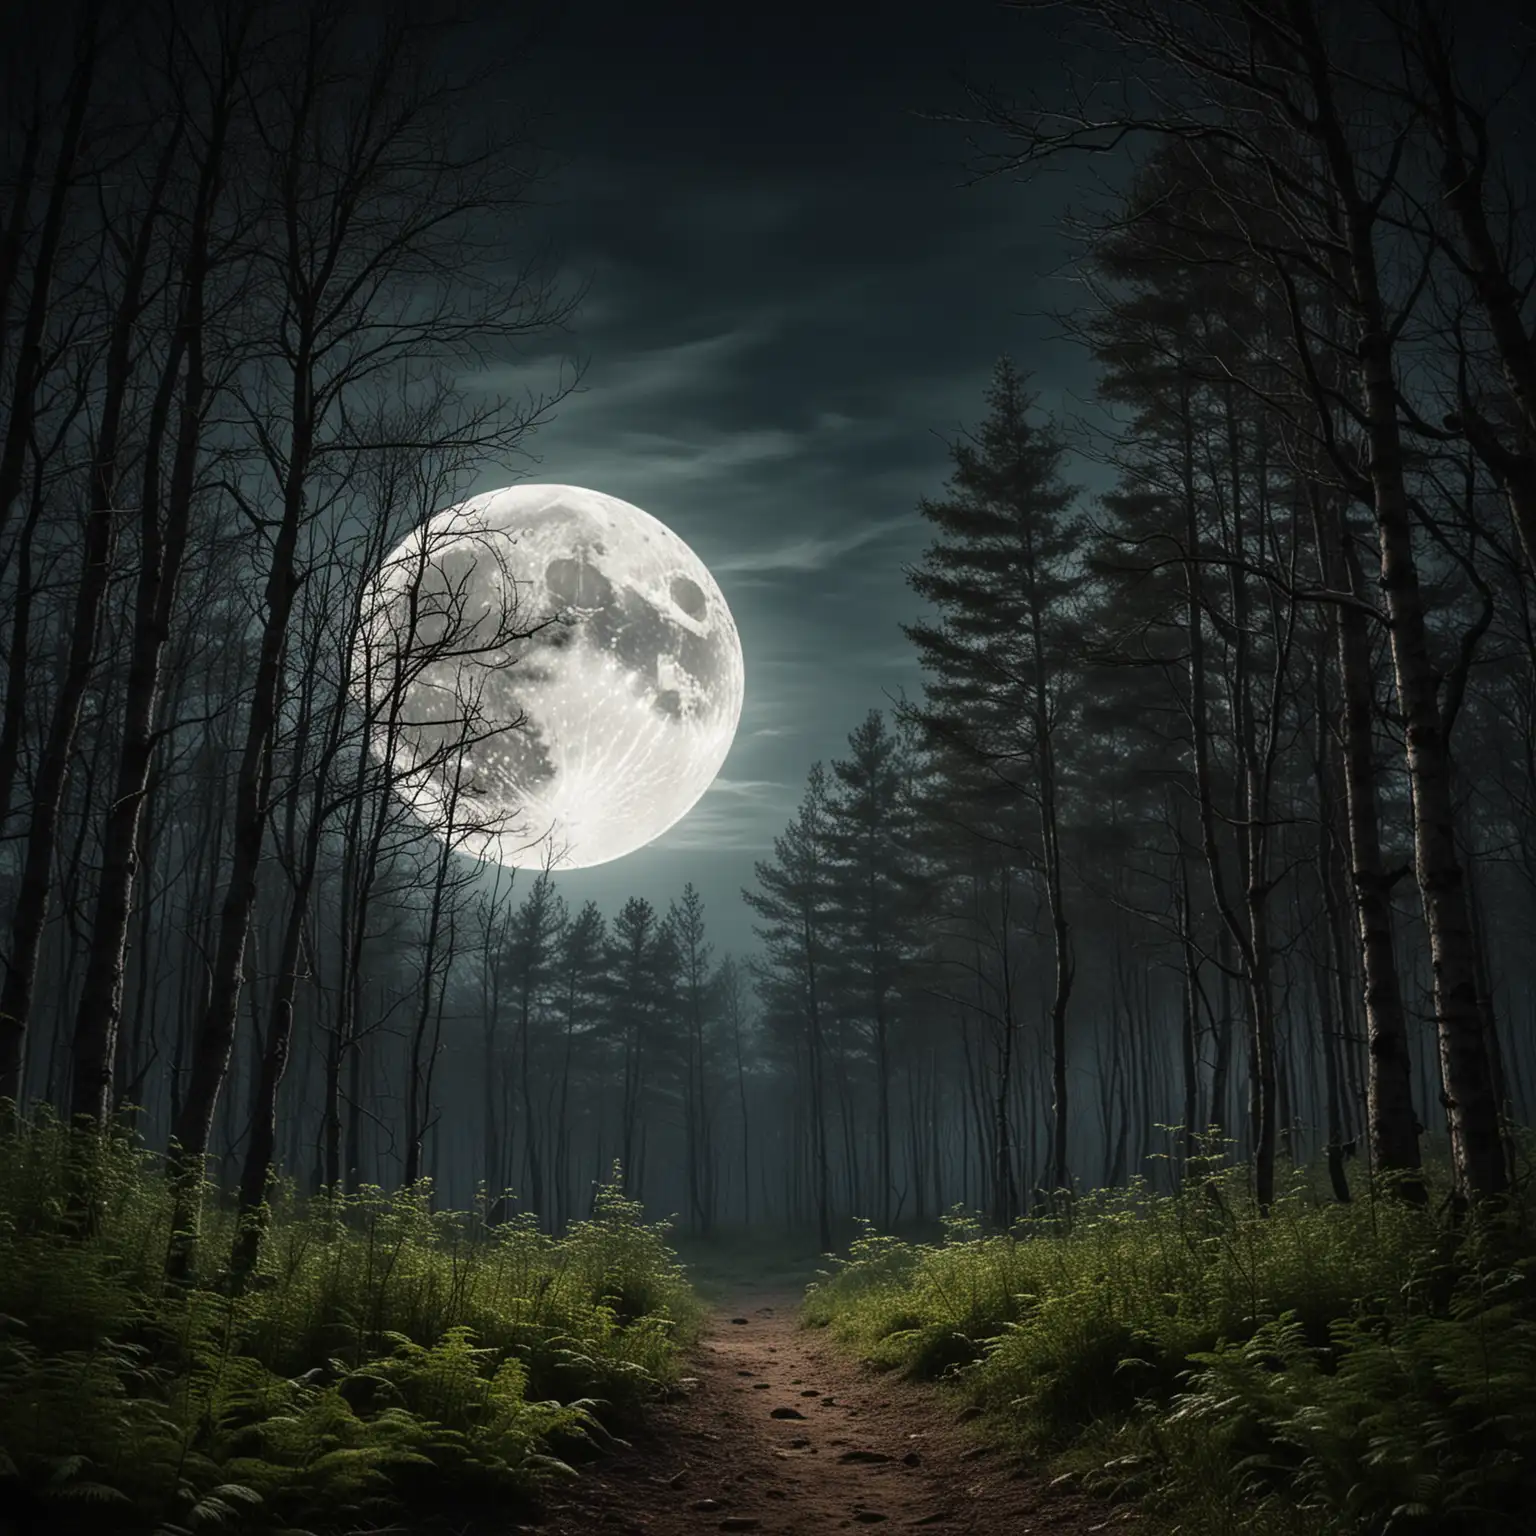 Enchanted Forest under the Moonlight